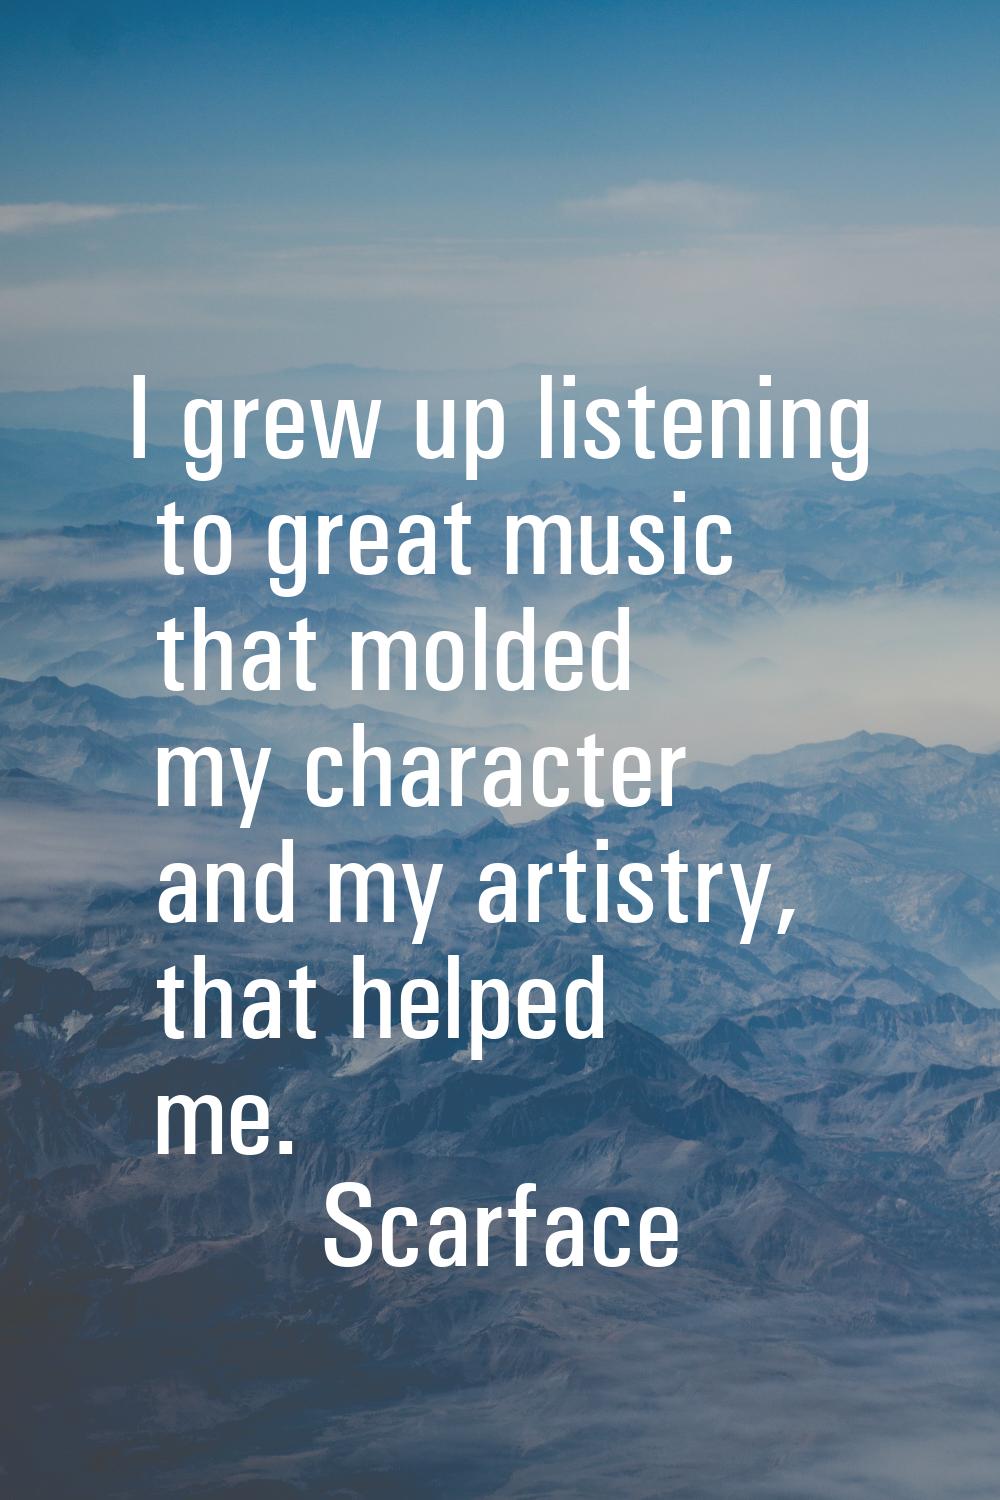 I grew up listening to great music that molded my character and my artistry, that helped me.